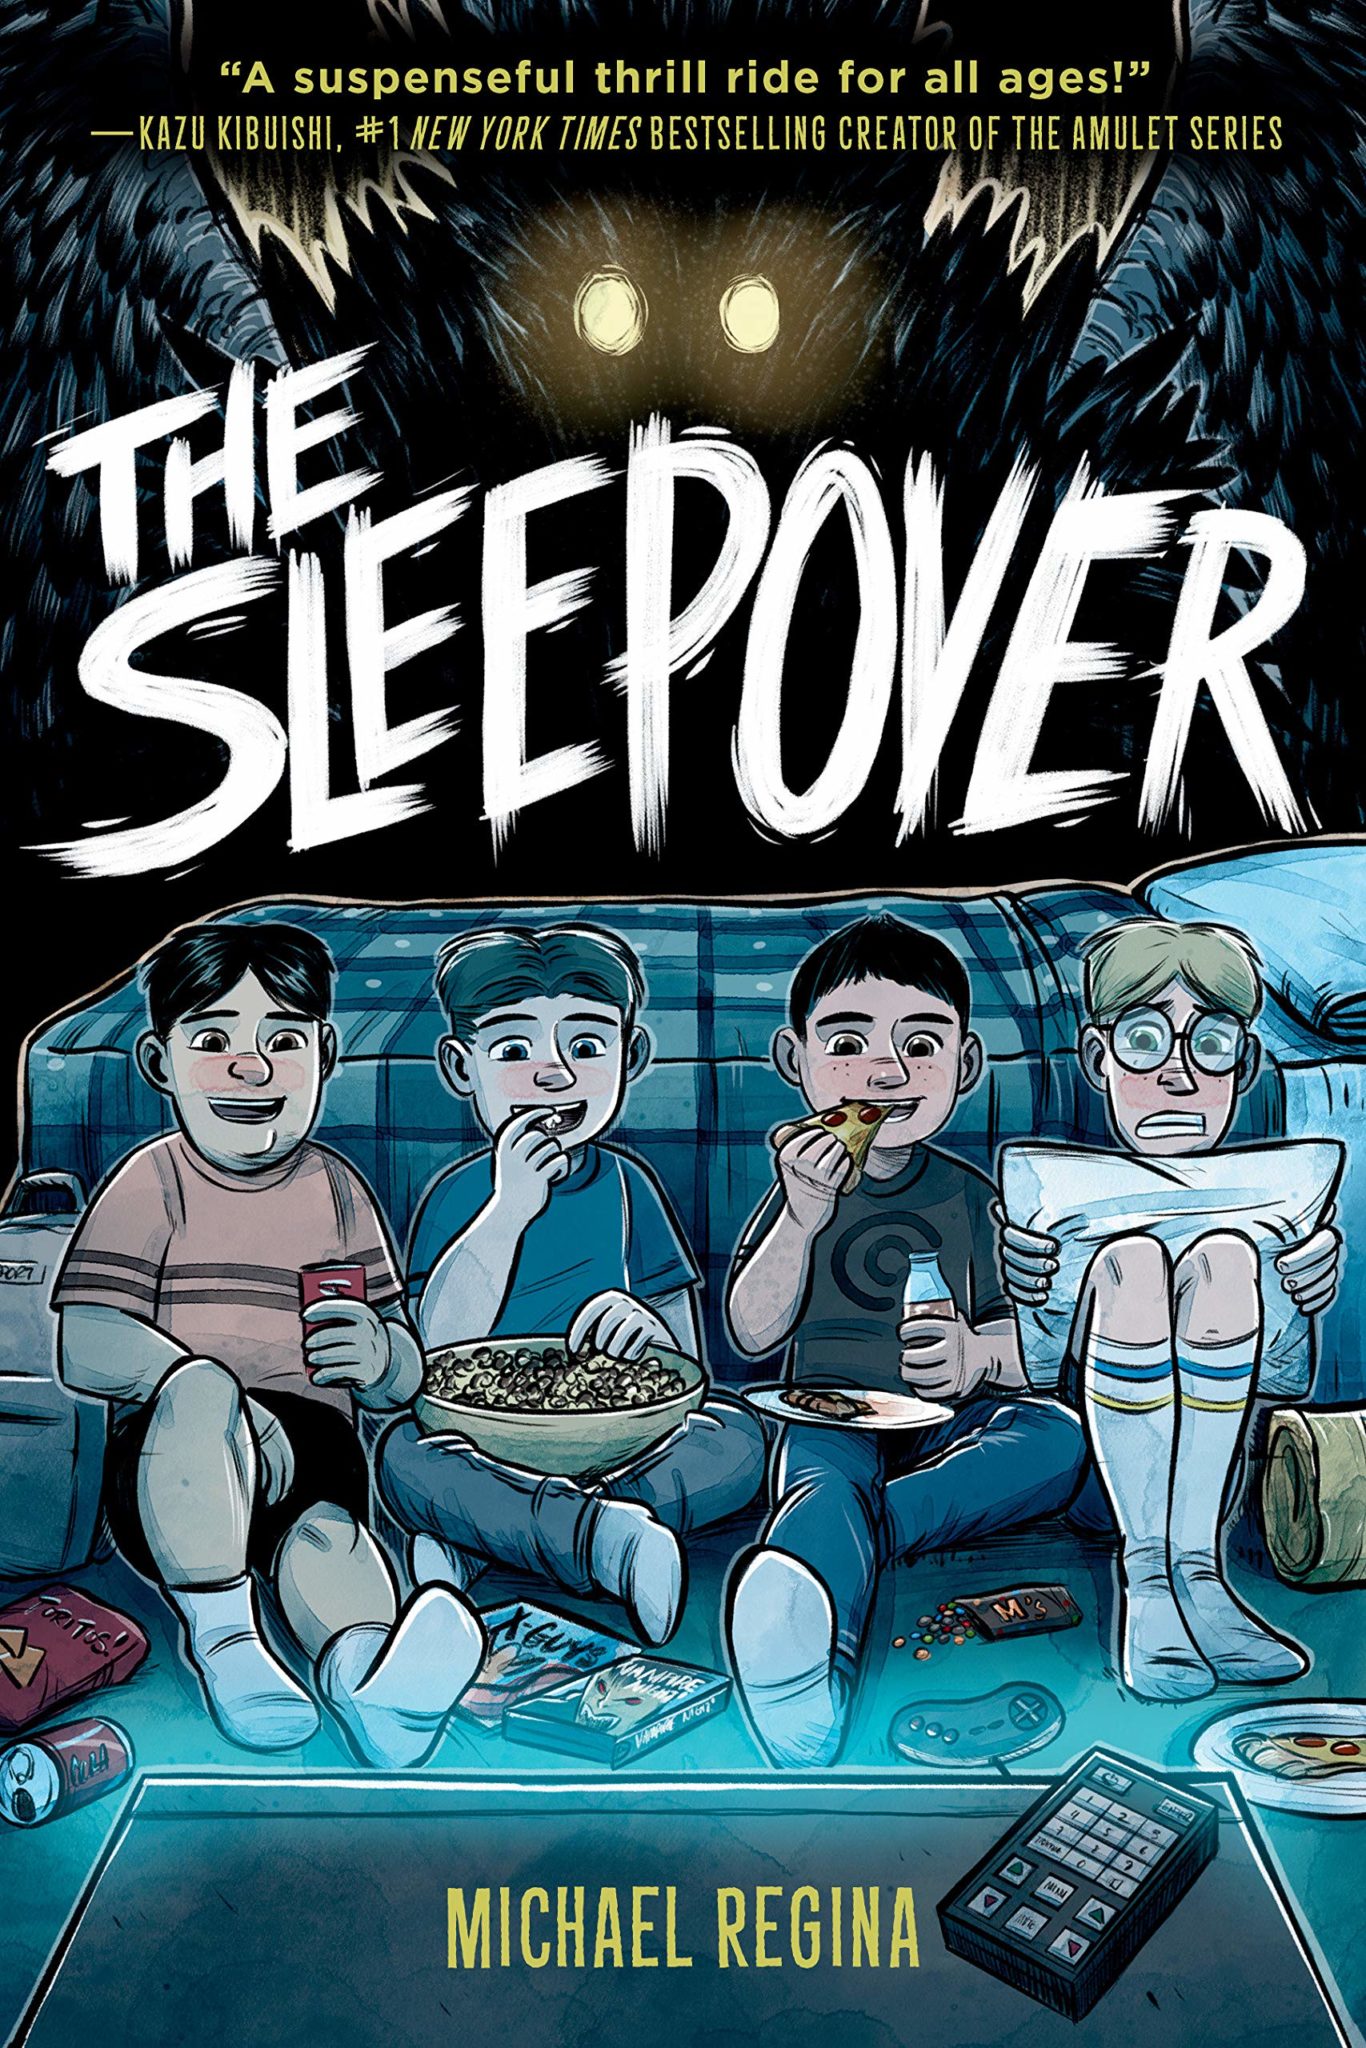 "The Sleepover" book cover by Michael Regina